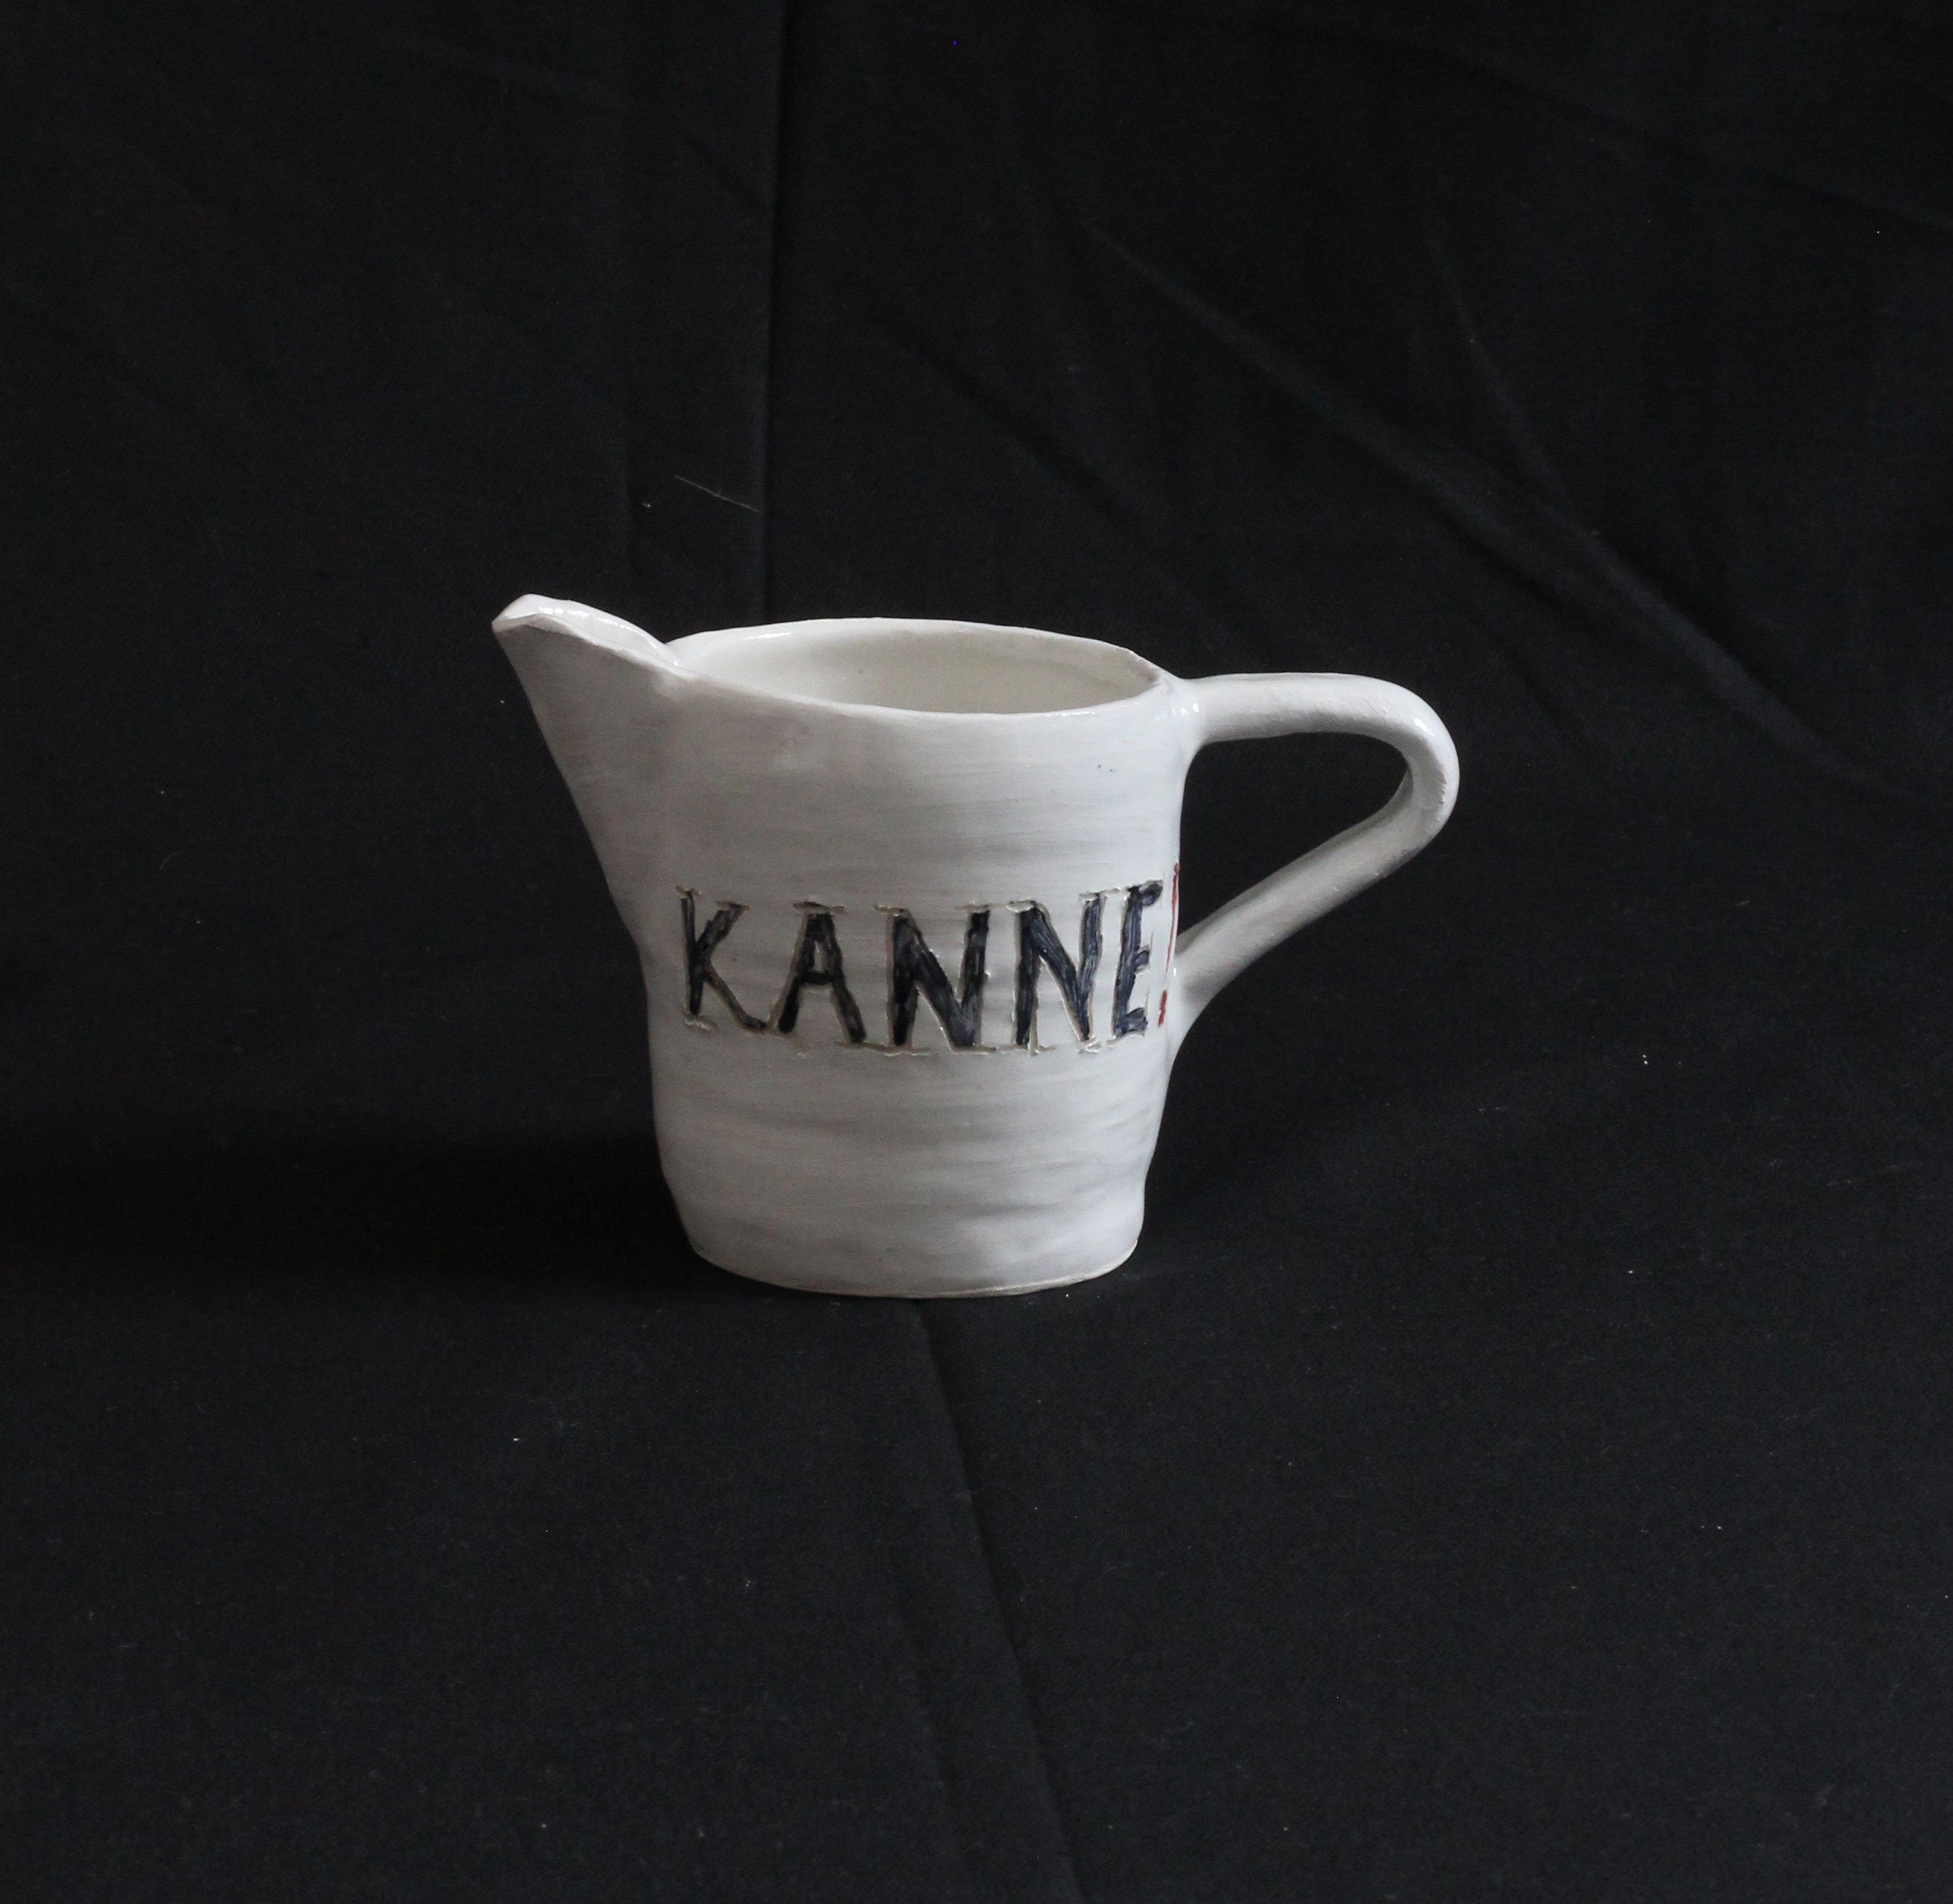 Typography and Pottery by Daniela Franz - Creative Work - $i